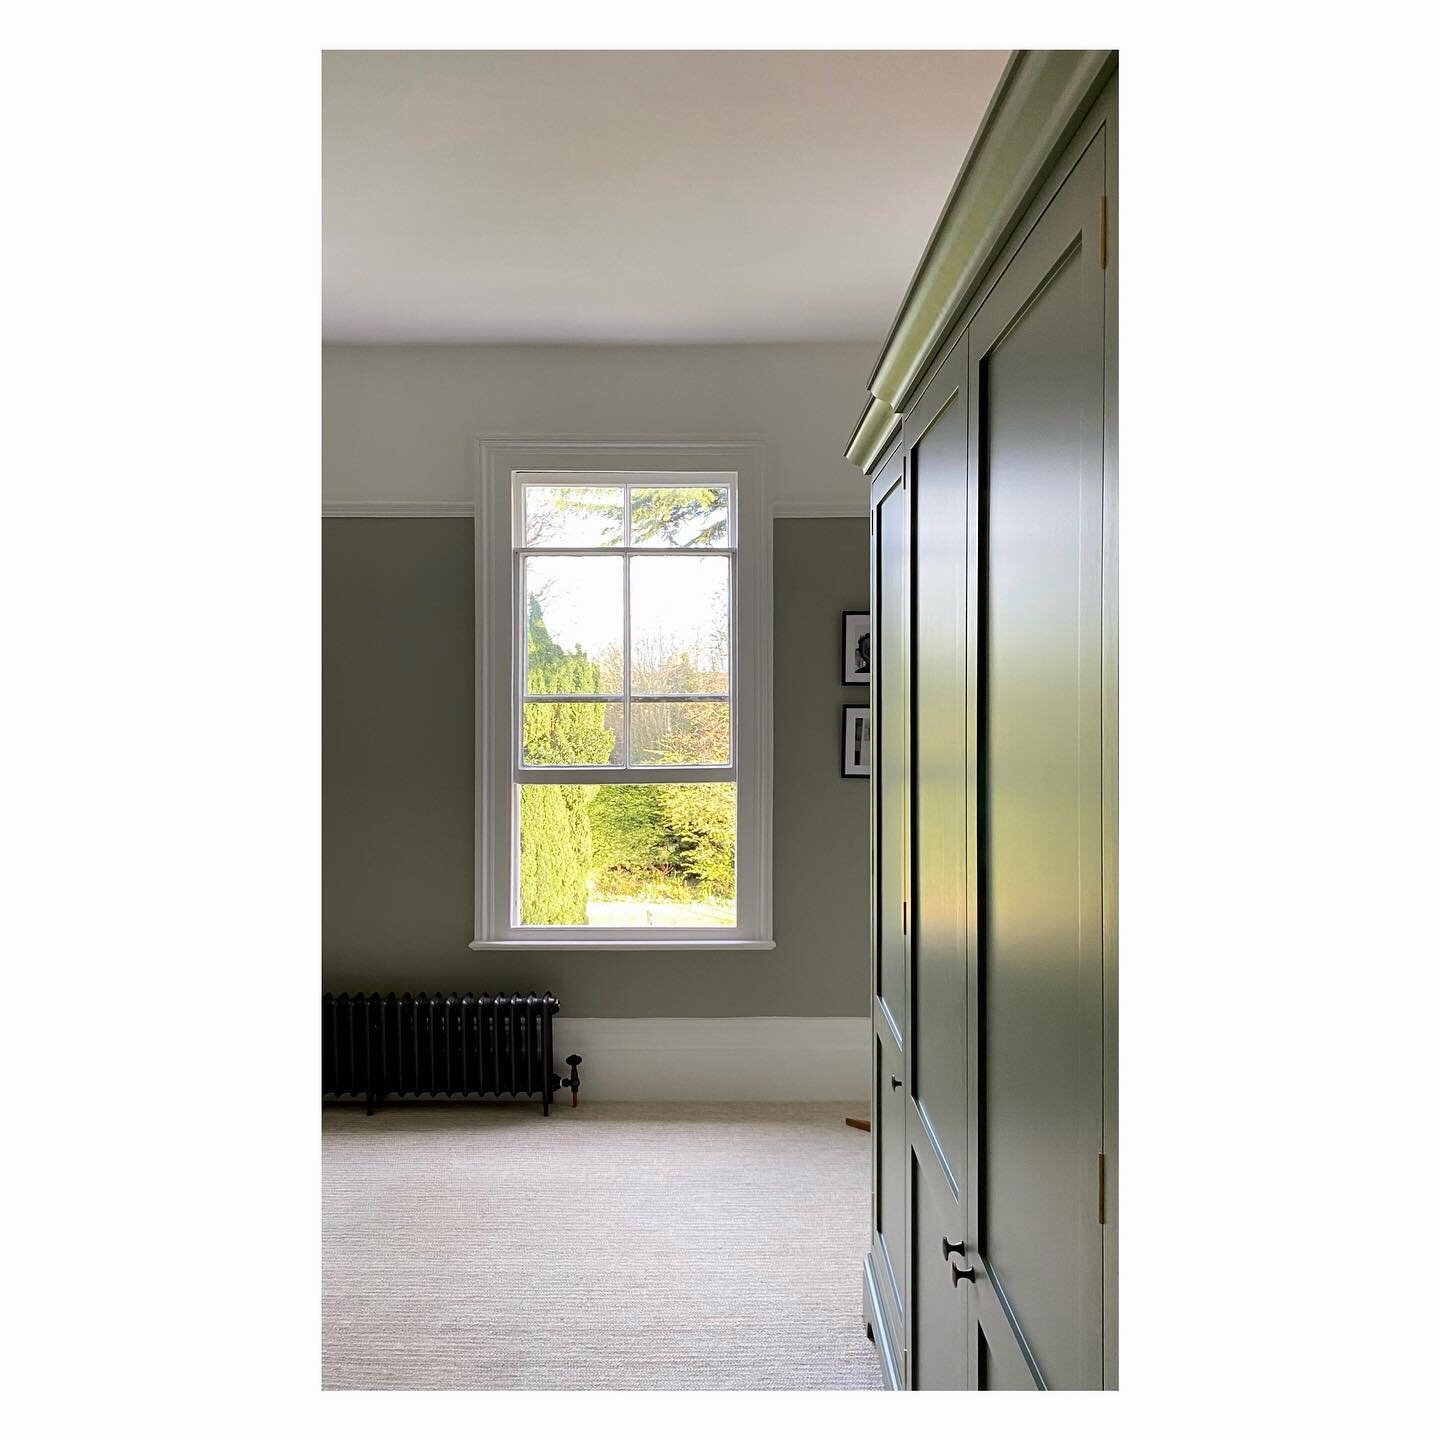 Our bespoke wardrobe project in Little Greene&rsquo;s Sage Green for a gorgeous country home..
.
.
.
.
#bespokewardrobe #interiordesign #countryliving #periodhome #littlegreenepaint #englishcountryhouse #interiors